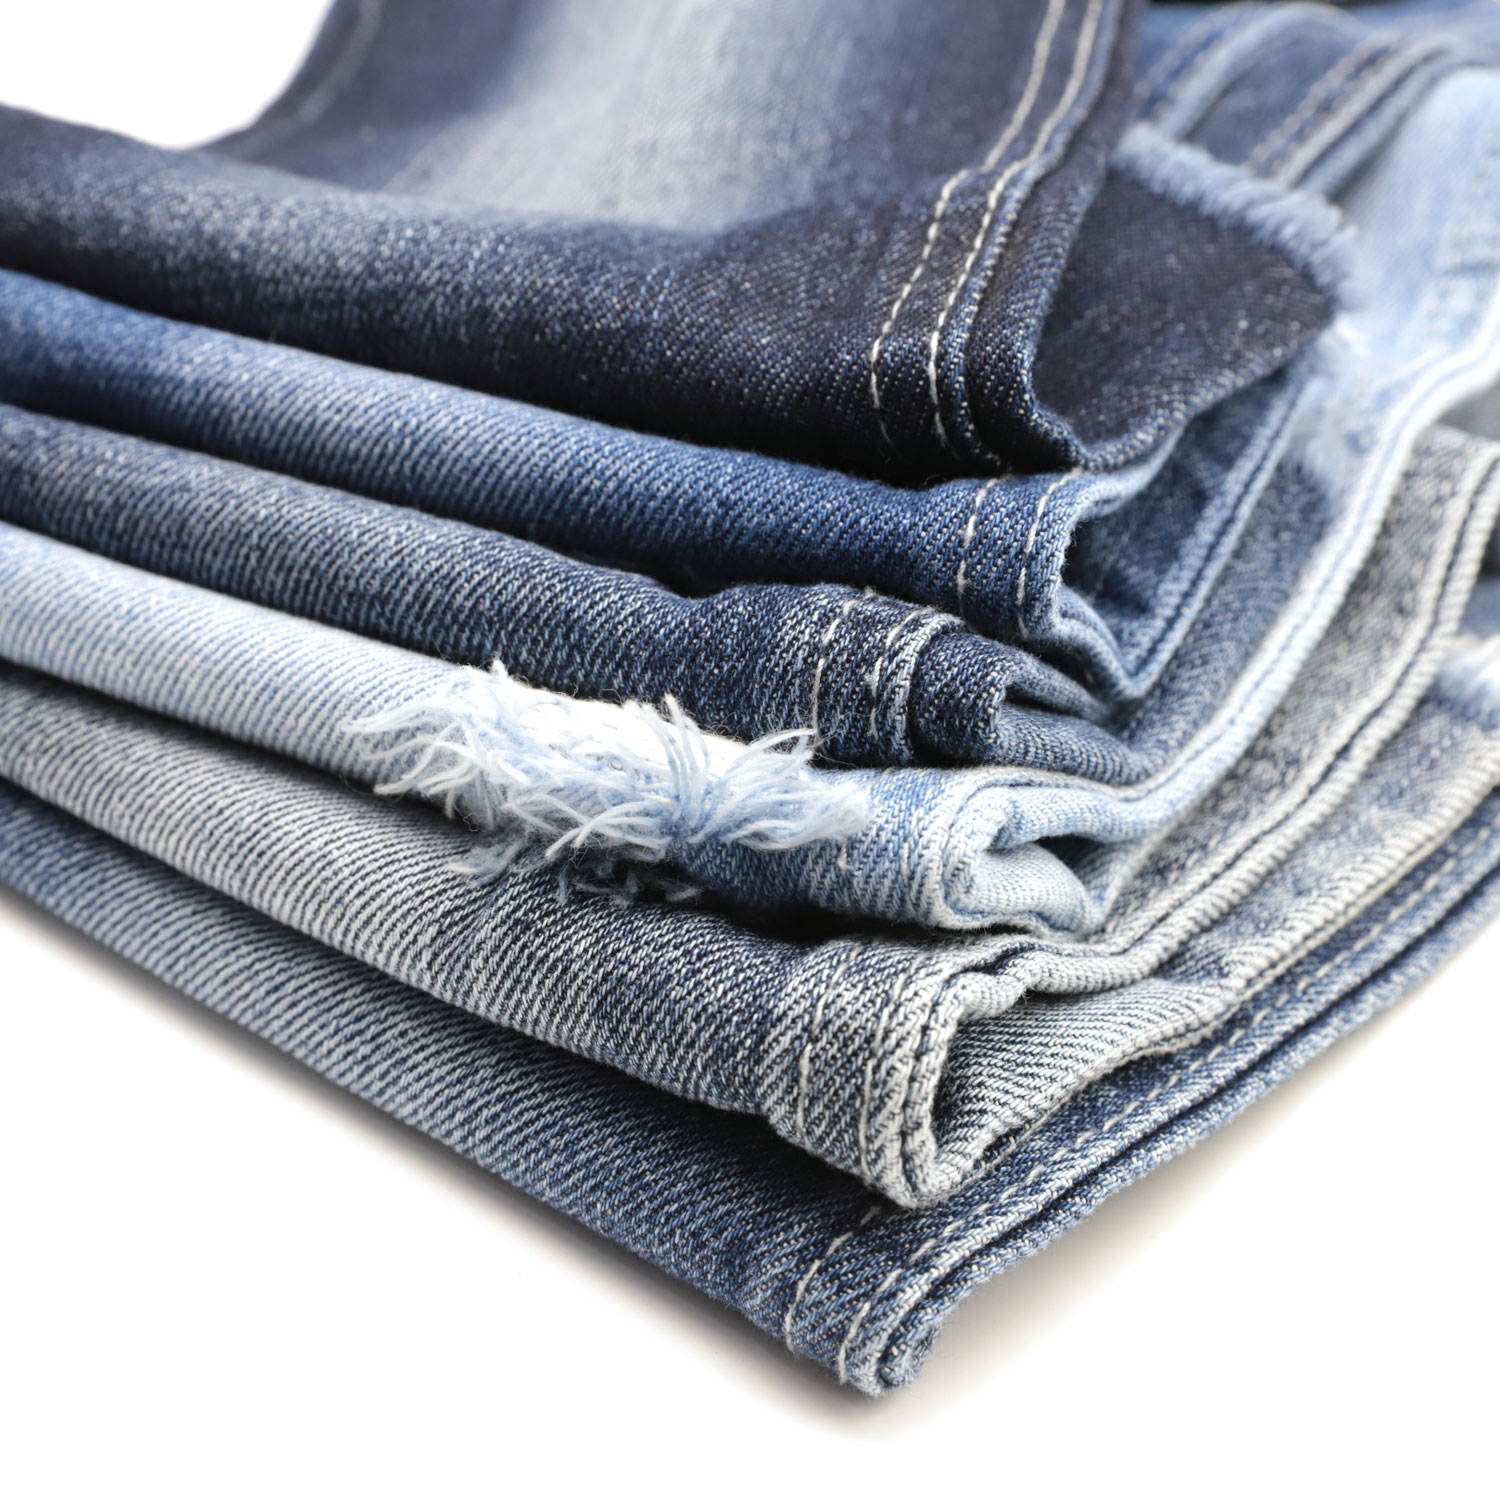 A Simple Way to Have the Best Wholesale Jeans Fabric Options 2